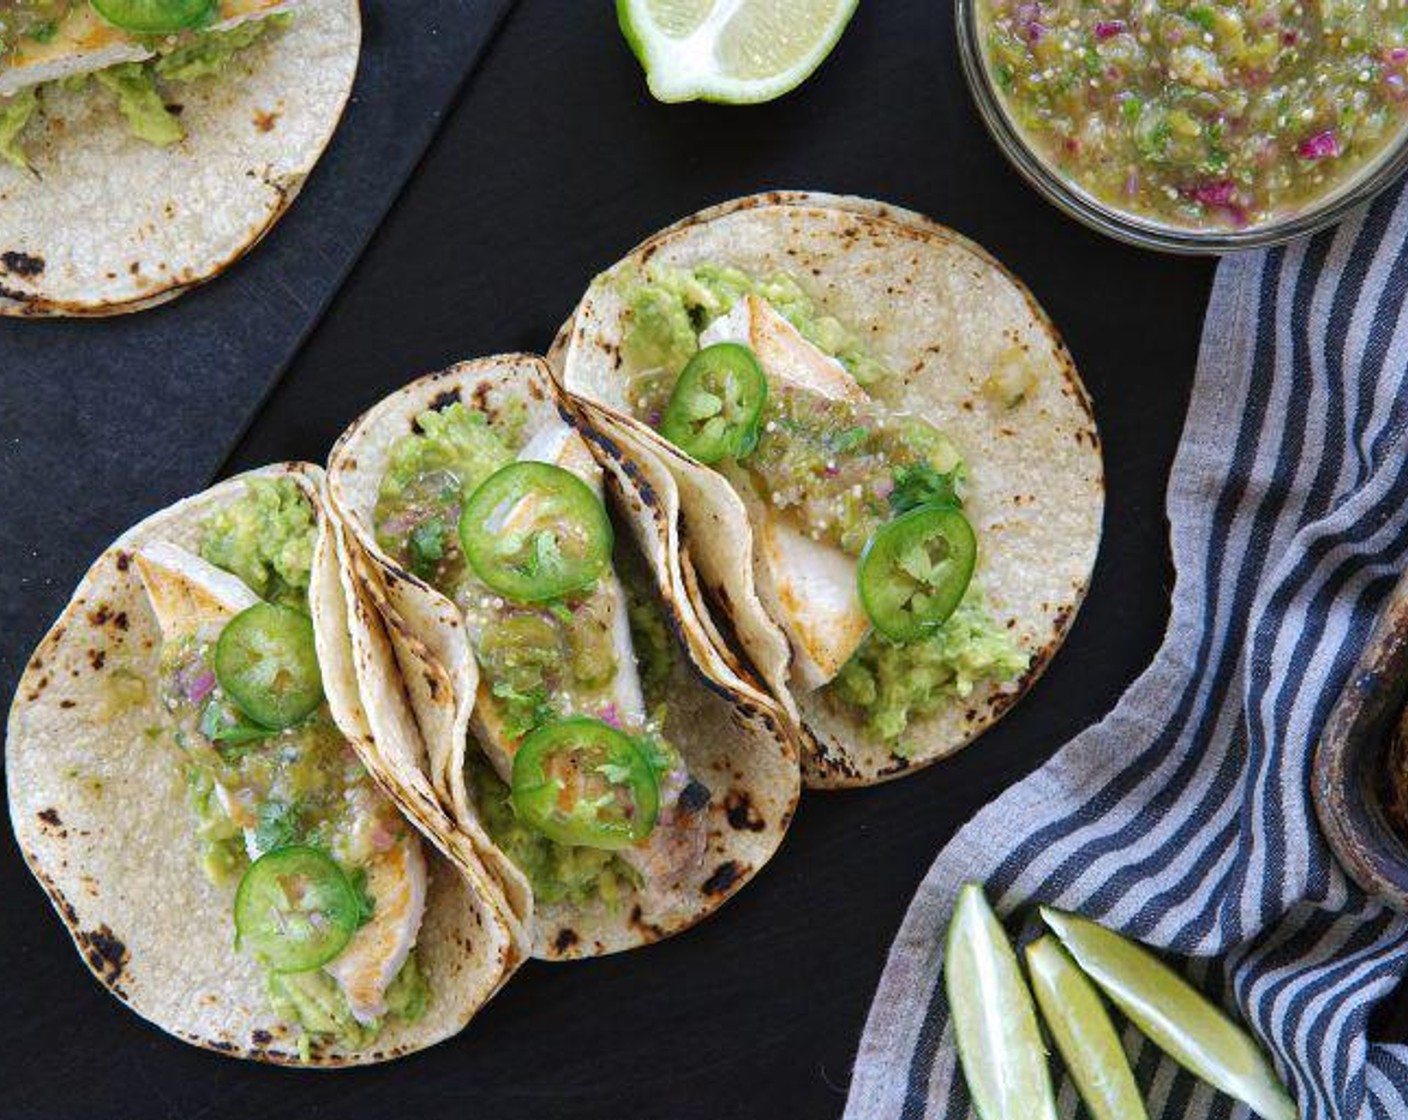 step 6 Layer your tacos as follows: 2 White Corn Tortillas (16), 1/8 of the Avocados (2), 1 piece of swordfish, and then 2 tablespoons of the tomatillo salsa. Serve with Lime (1) and Hot Sauce (to taste).